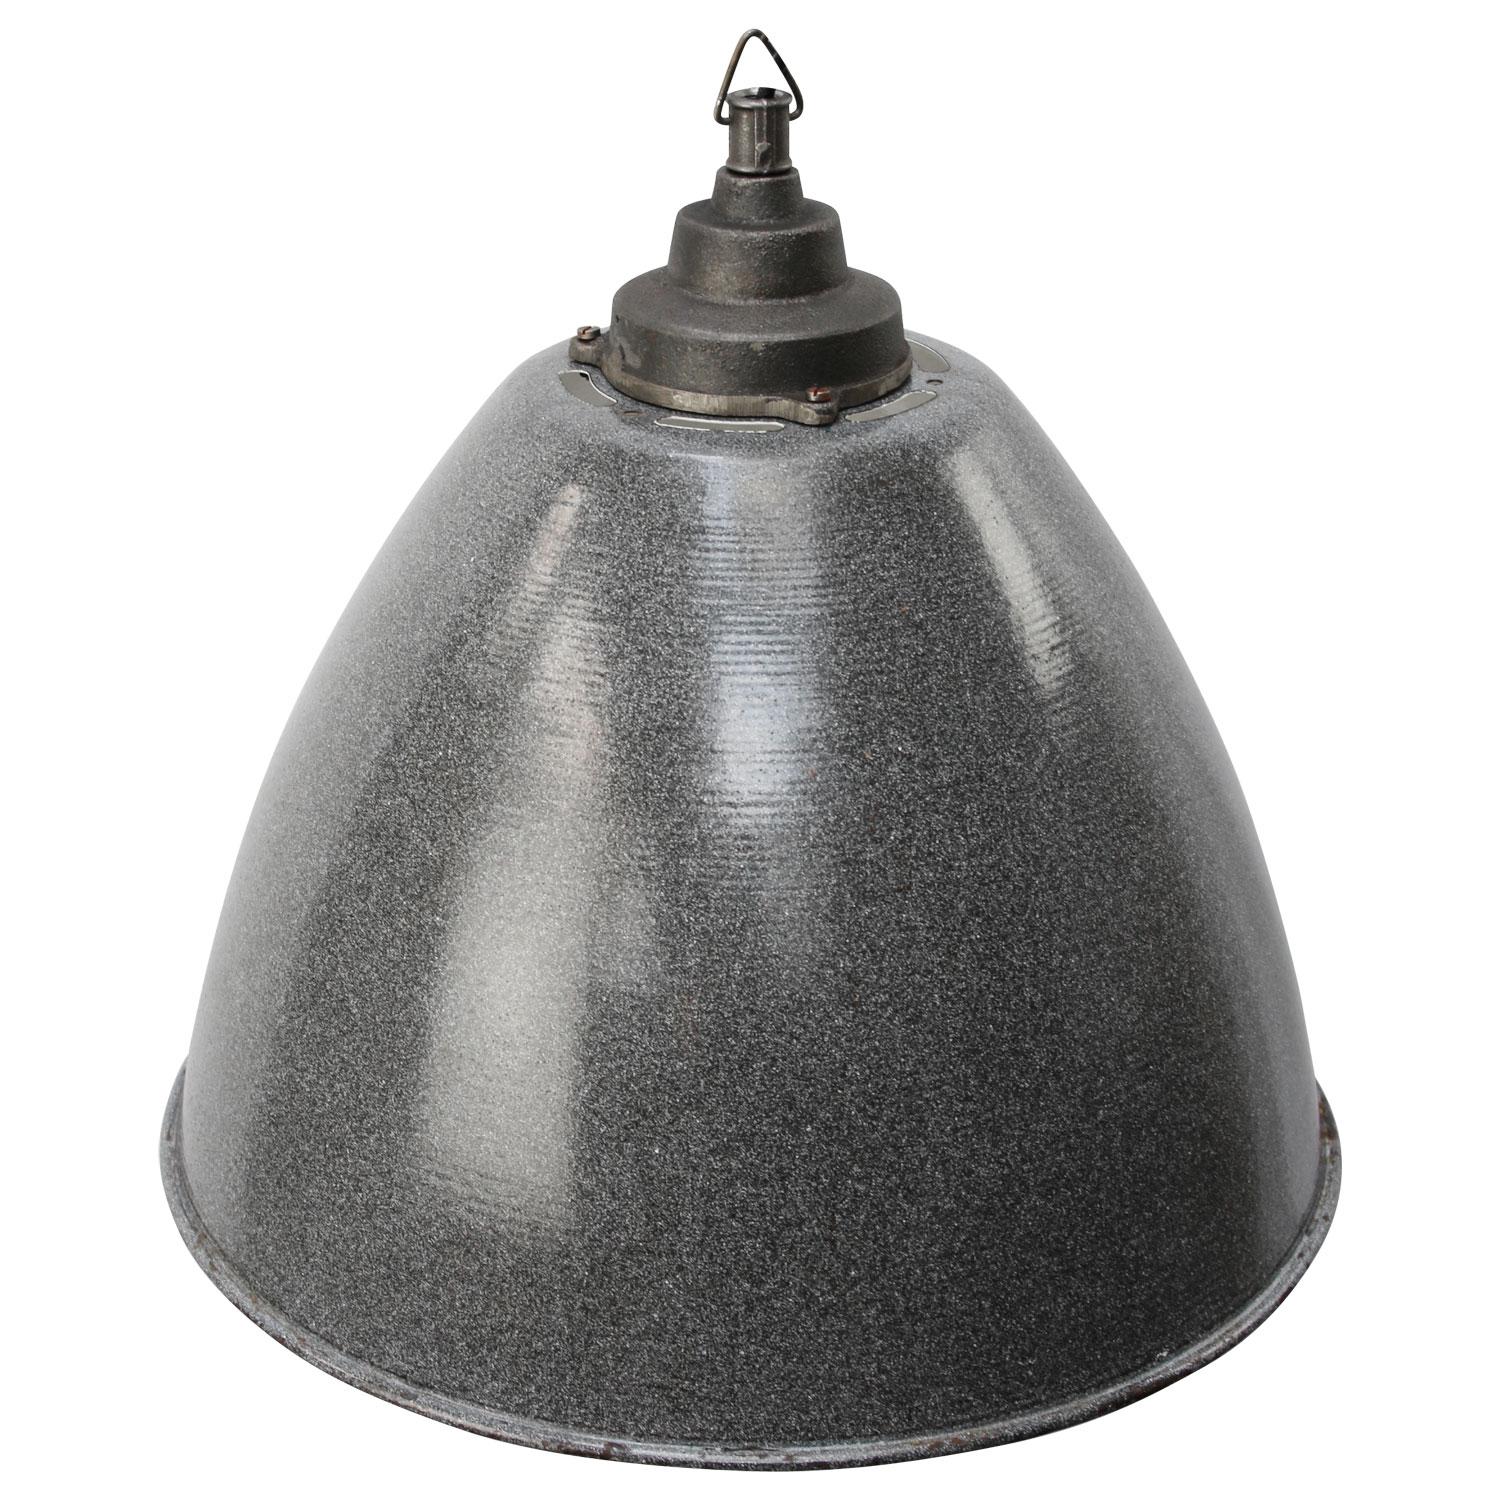 Classic European factory lamp / big size Industrial lamp. Light gray enamel with white interior. 

Weight 5.0 kg / 11 lb. 

Priced per individual item. All lamps have been made suitable by international standards for incandescent light bulbs,